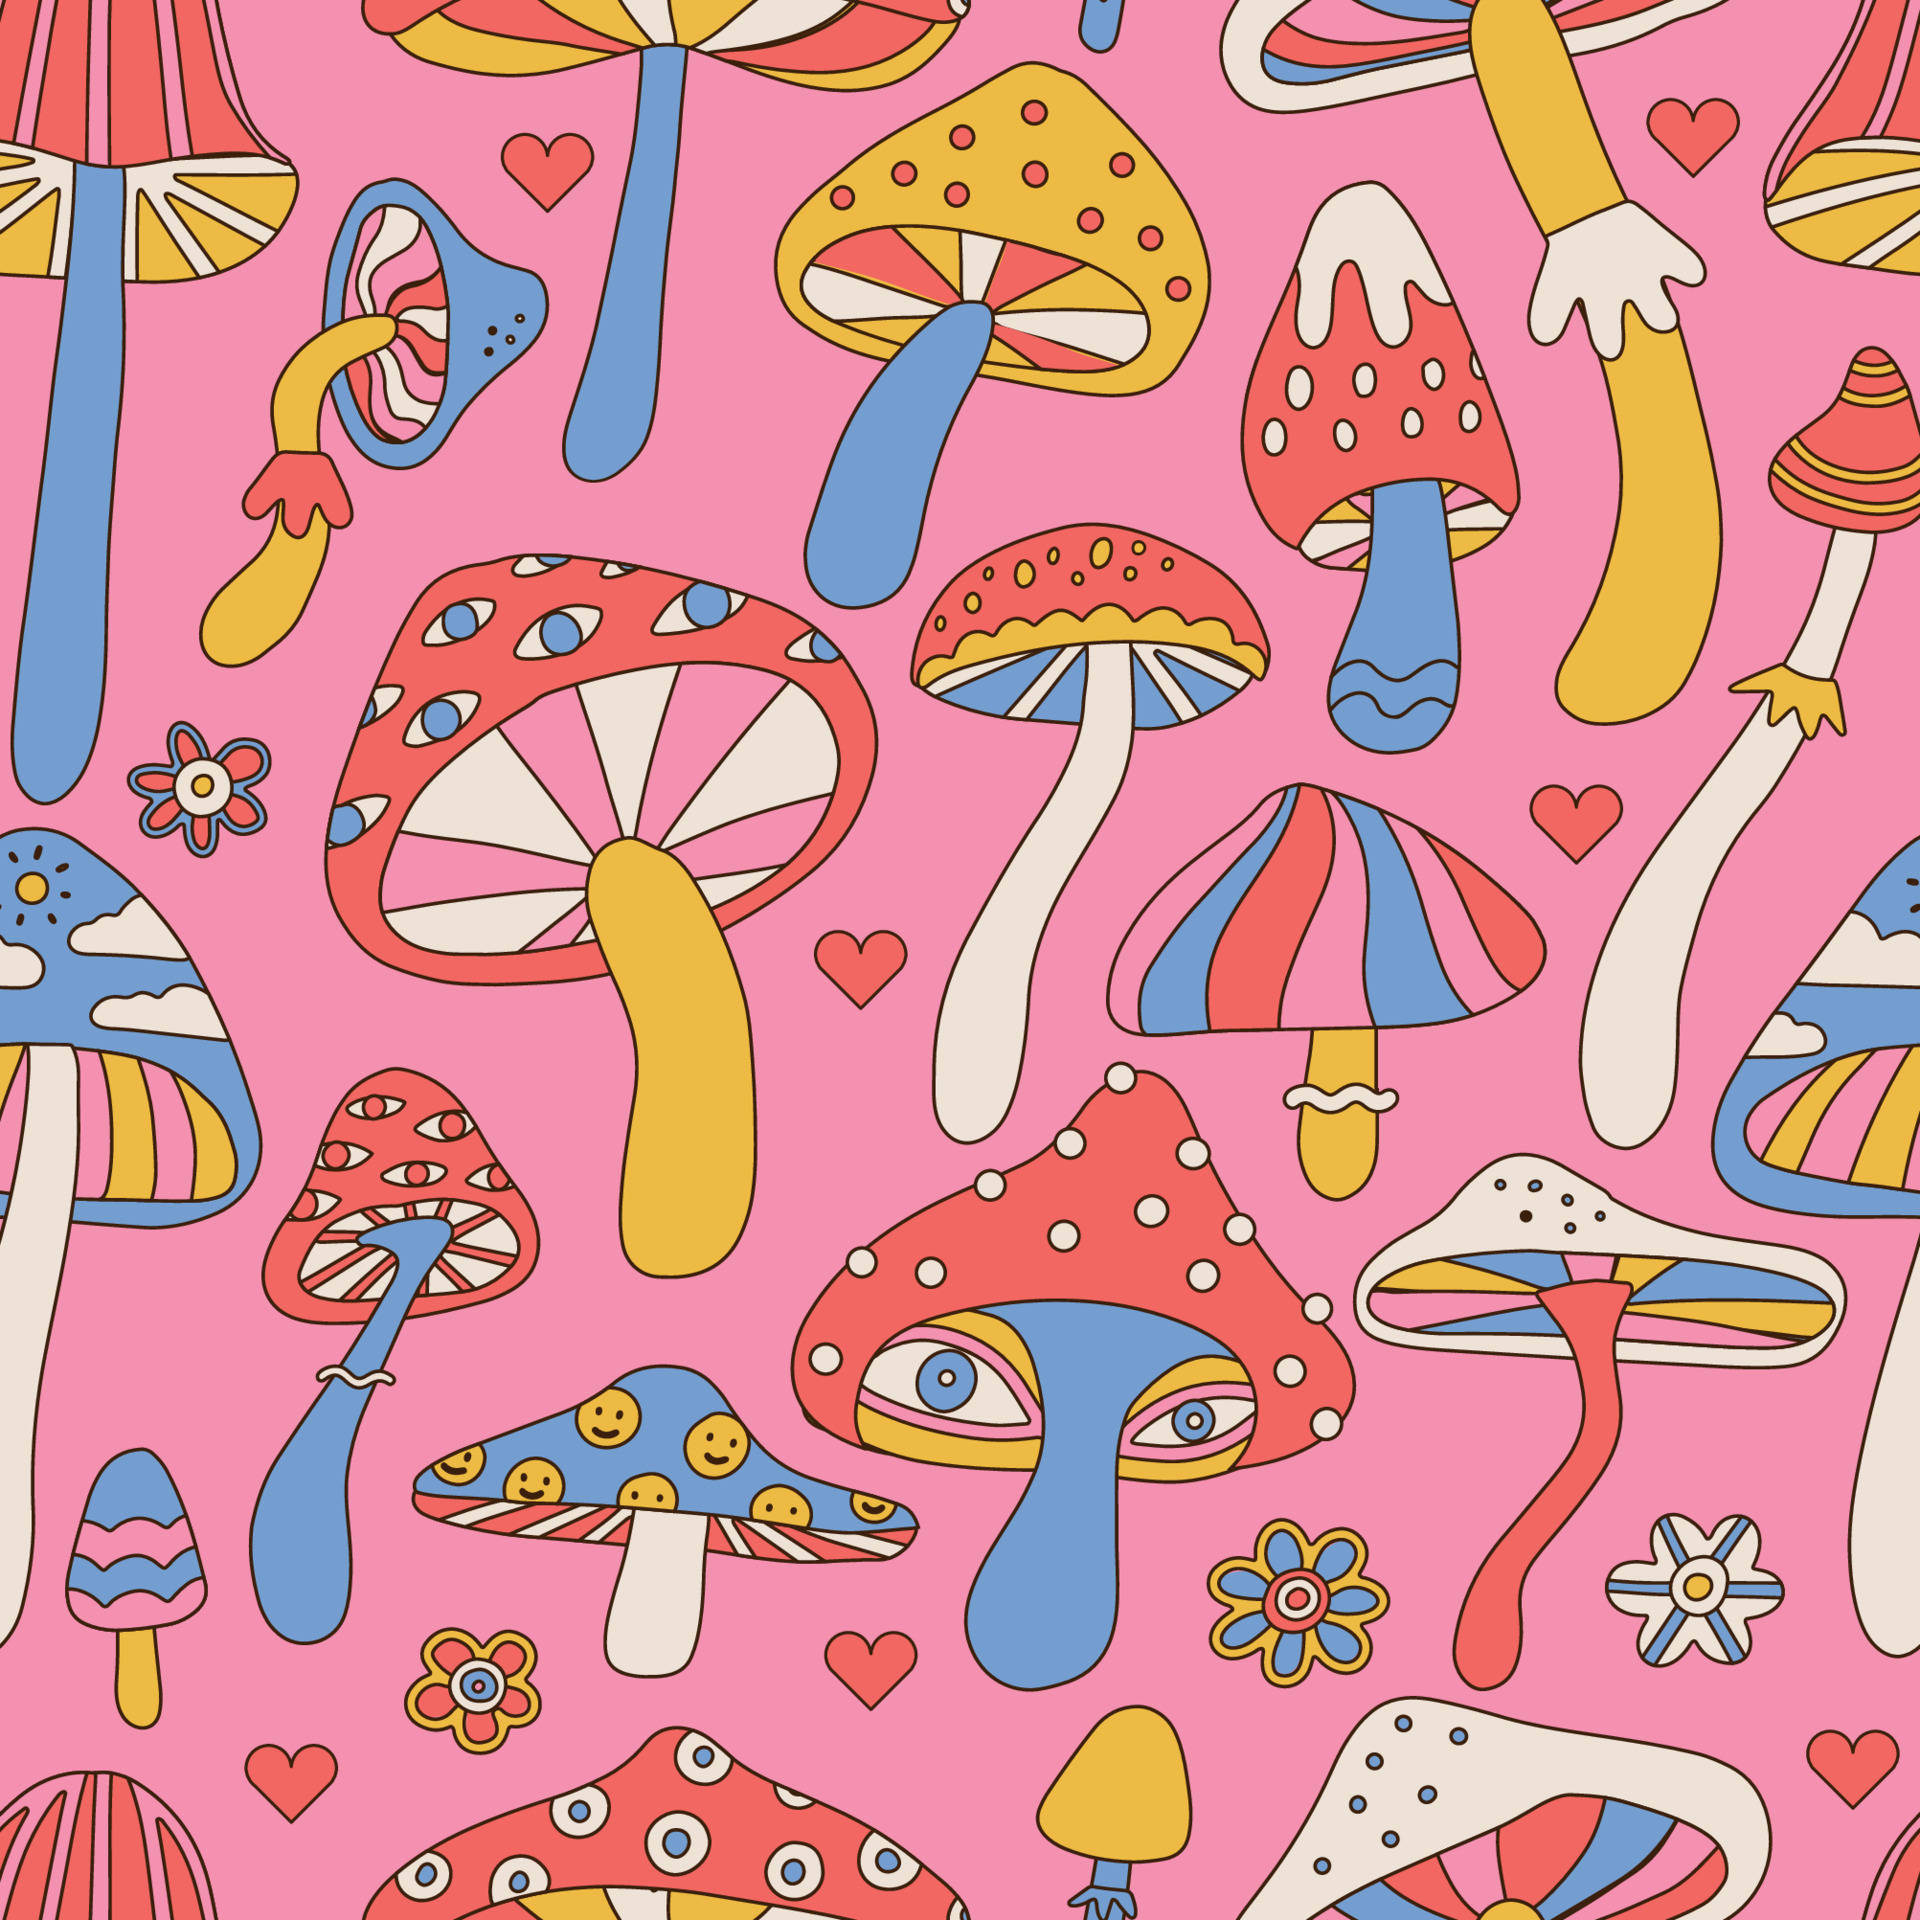 A vibrant psychedelic mushroom in an alluring multicolored environment Wallpaper